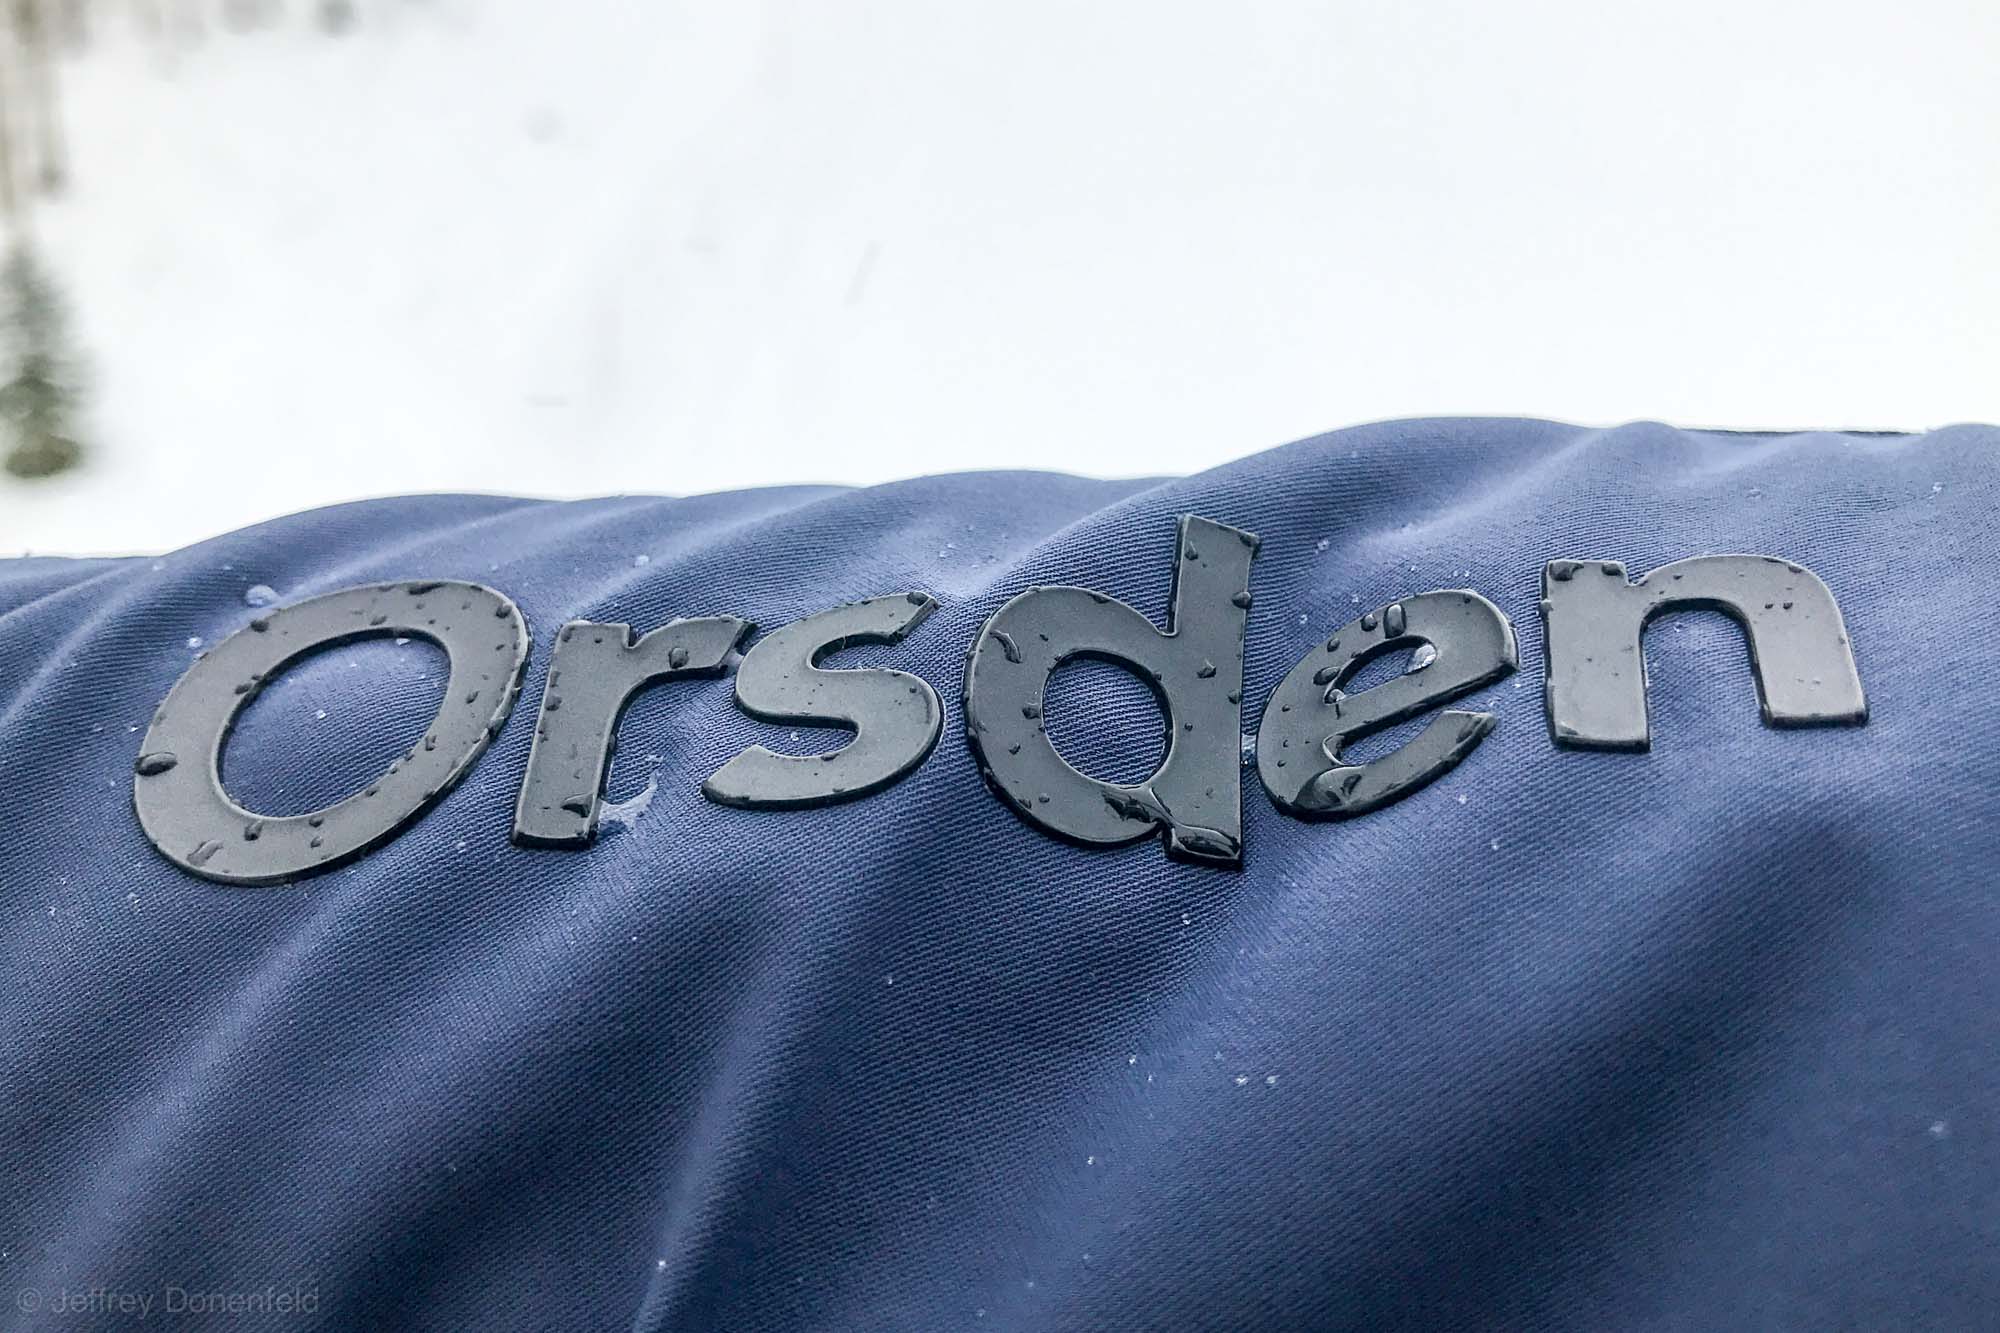 Charging Pow With The Orsden Men’s Slope Jacket